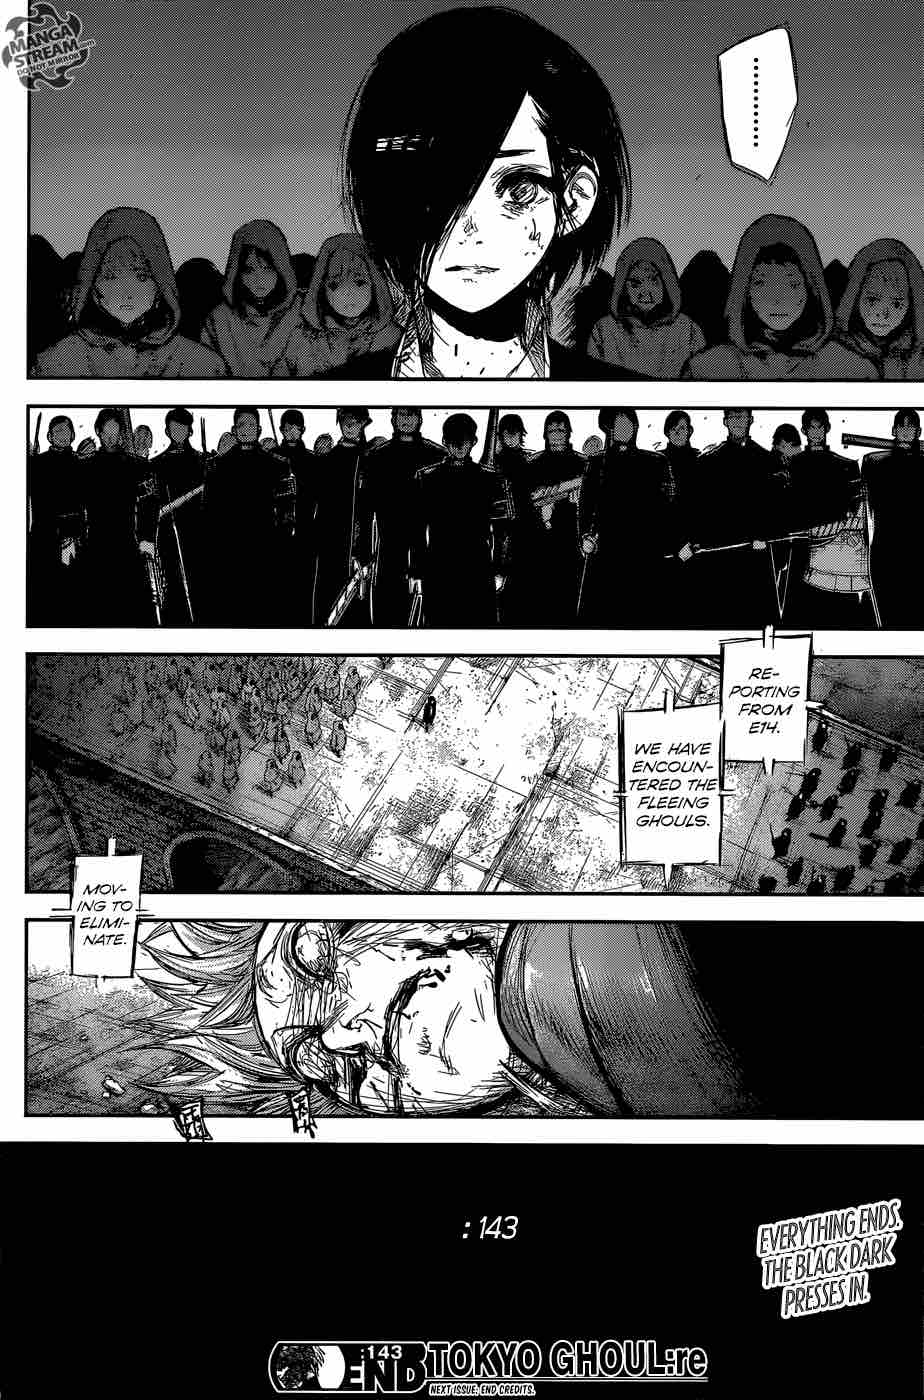 Tokyo Ghoul Re Chapter 143 Tokyo Ghoul Manga Online